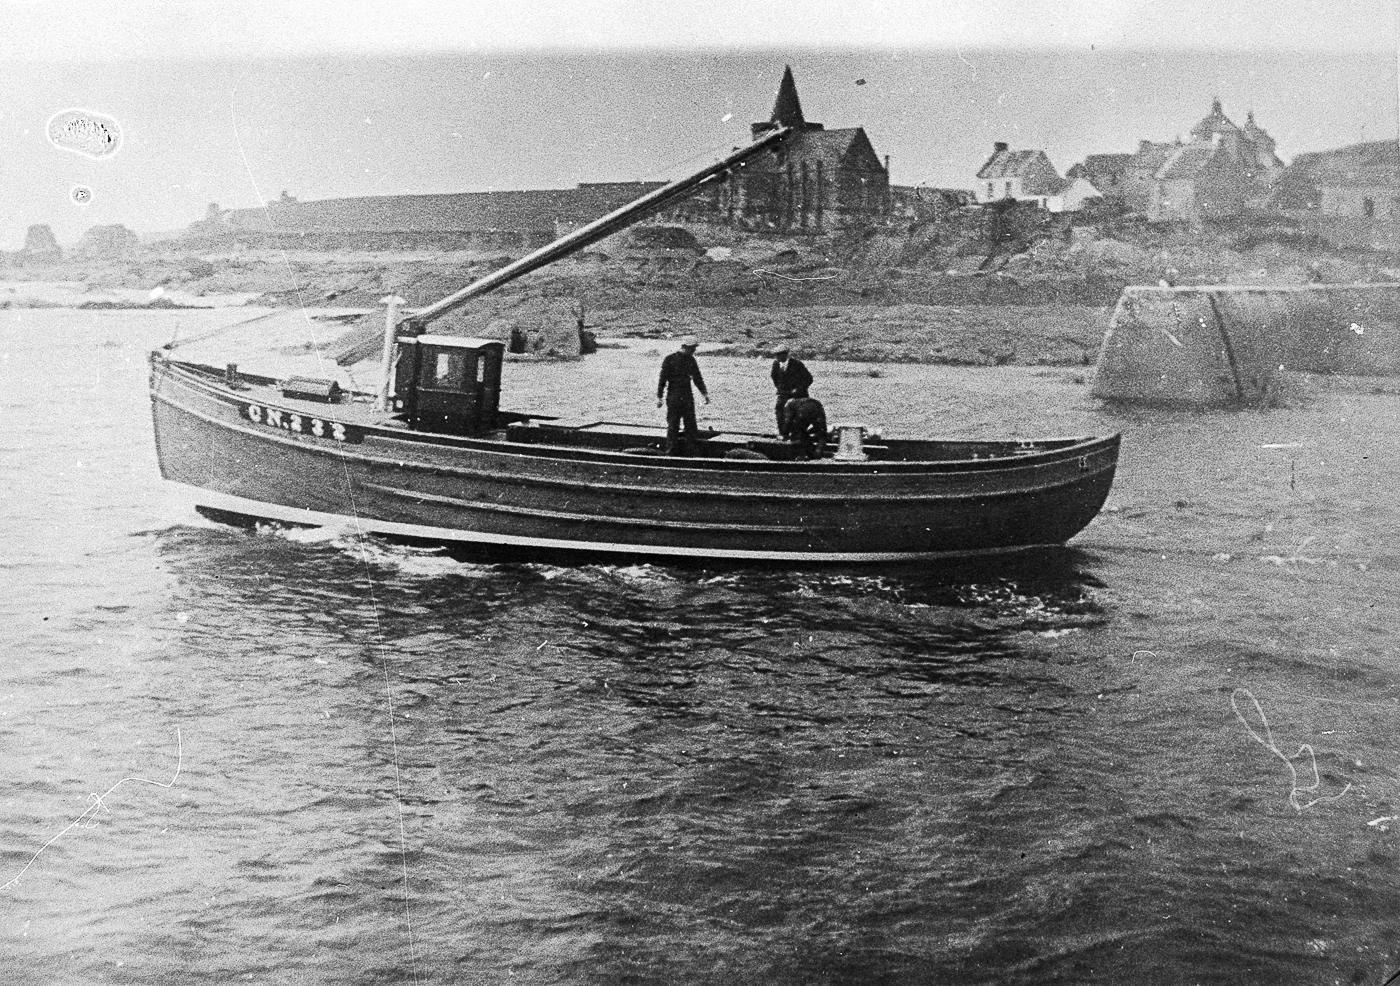 'Desperandum', CN232, in harbour, St Monans, 1928. 'Desperandum', CN232, was built by J. Miller & Sons boatyard in St Monans for John Short of Campbeltown. This ringnetter had a forward wheelhouse, but this did not prove popular and was later moved aft.